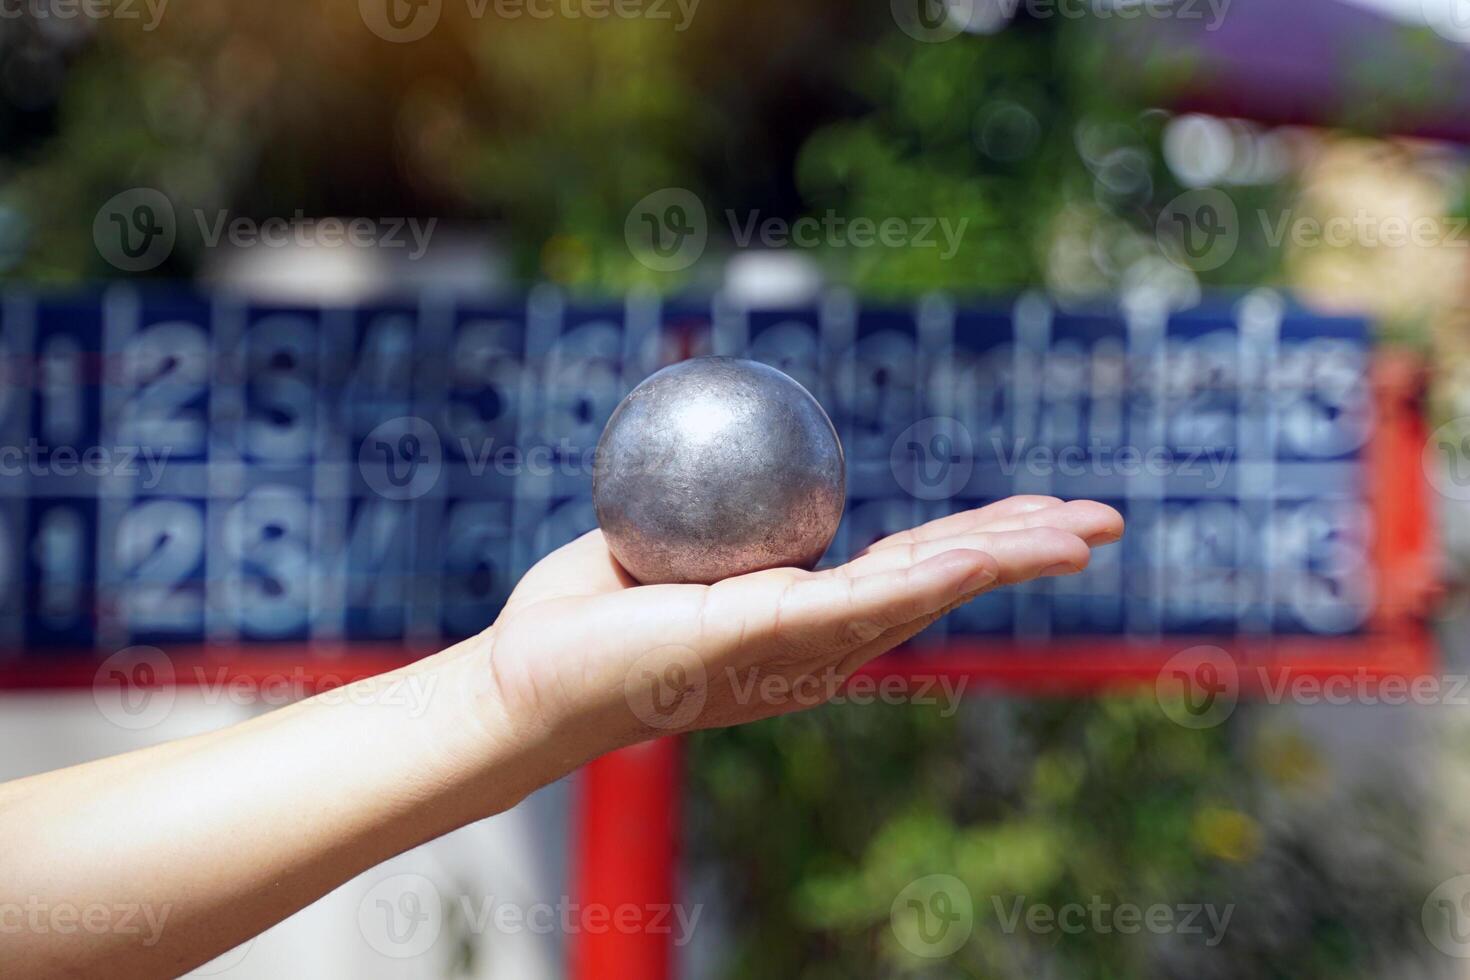 Players hold a petanque ball in their hands and prepare to throw it in order to place the petanque ball as close to the target ball as possible. photo